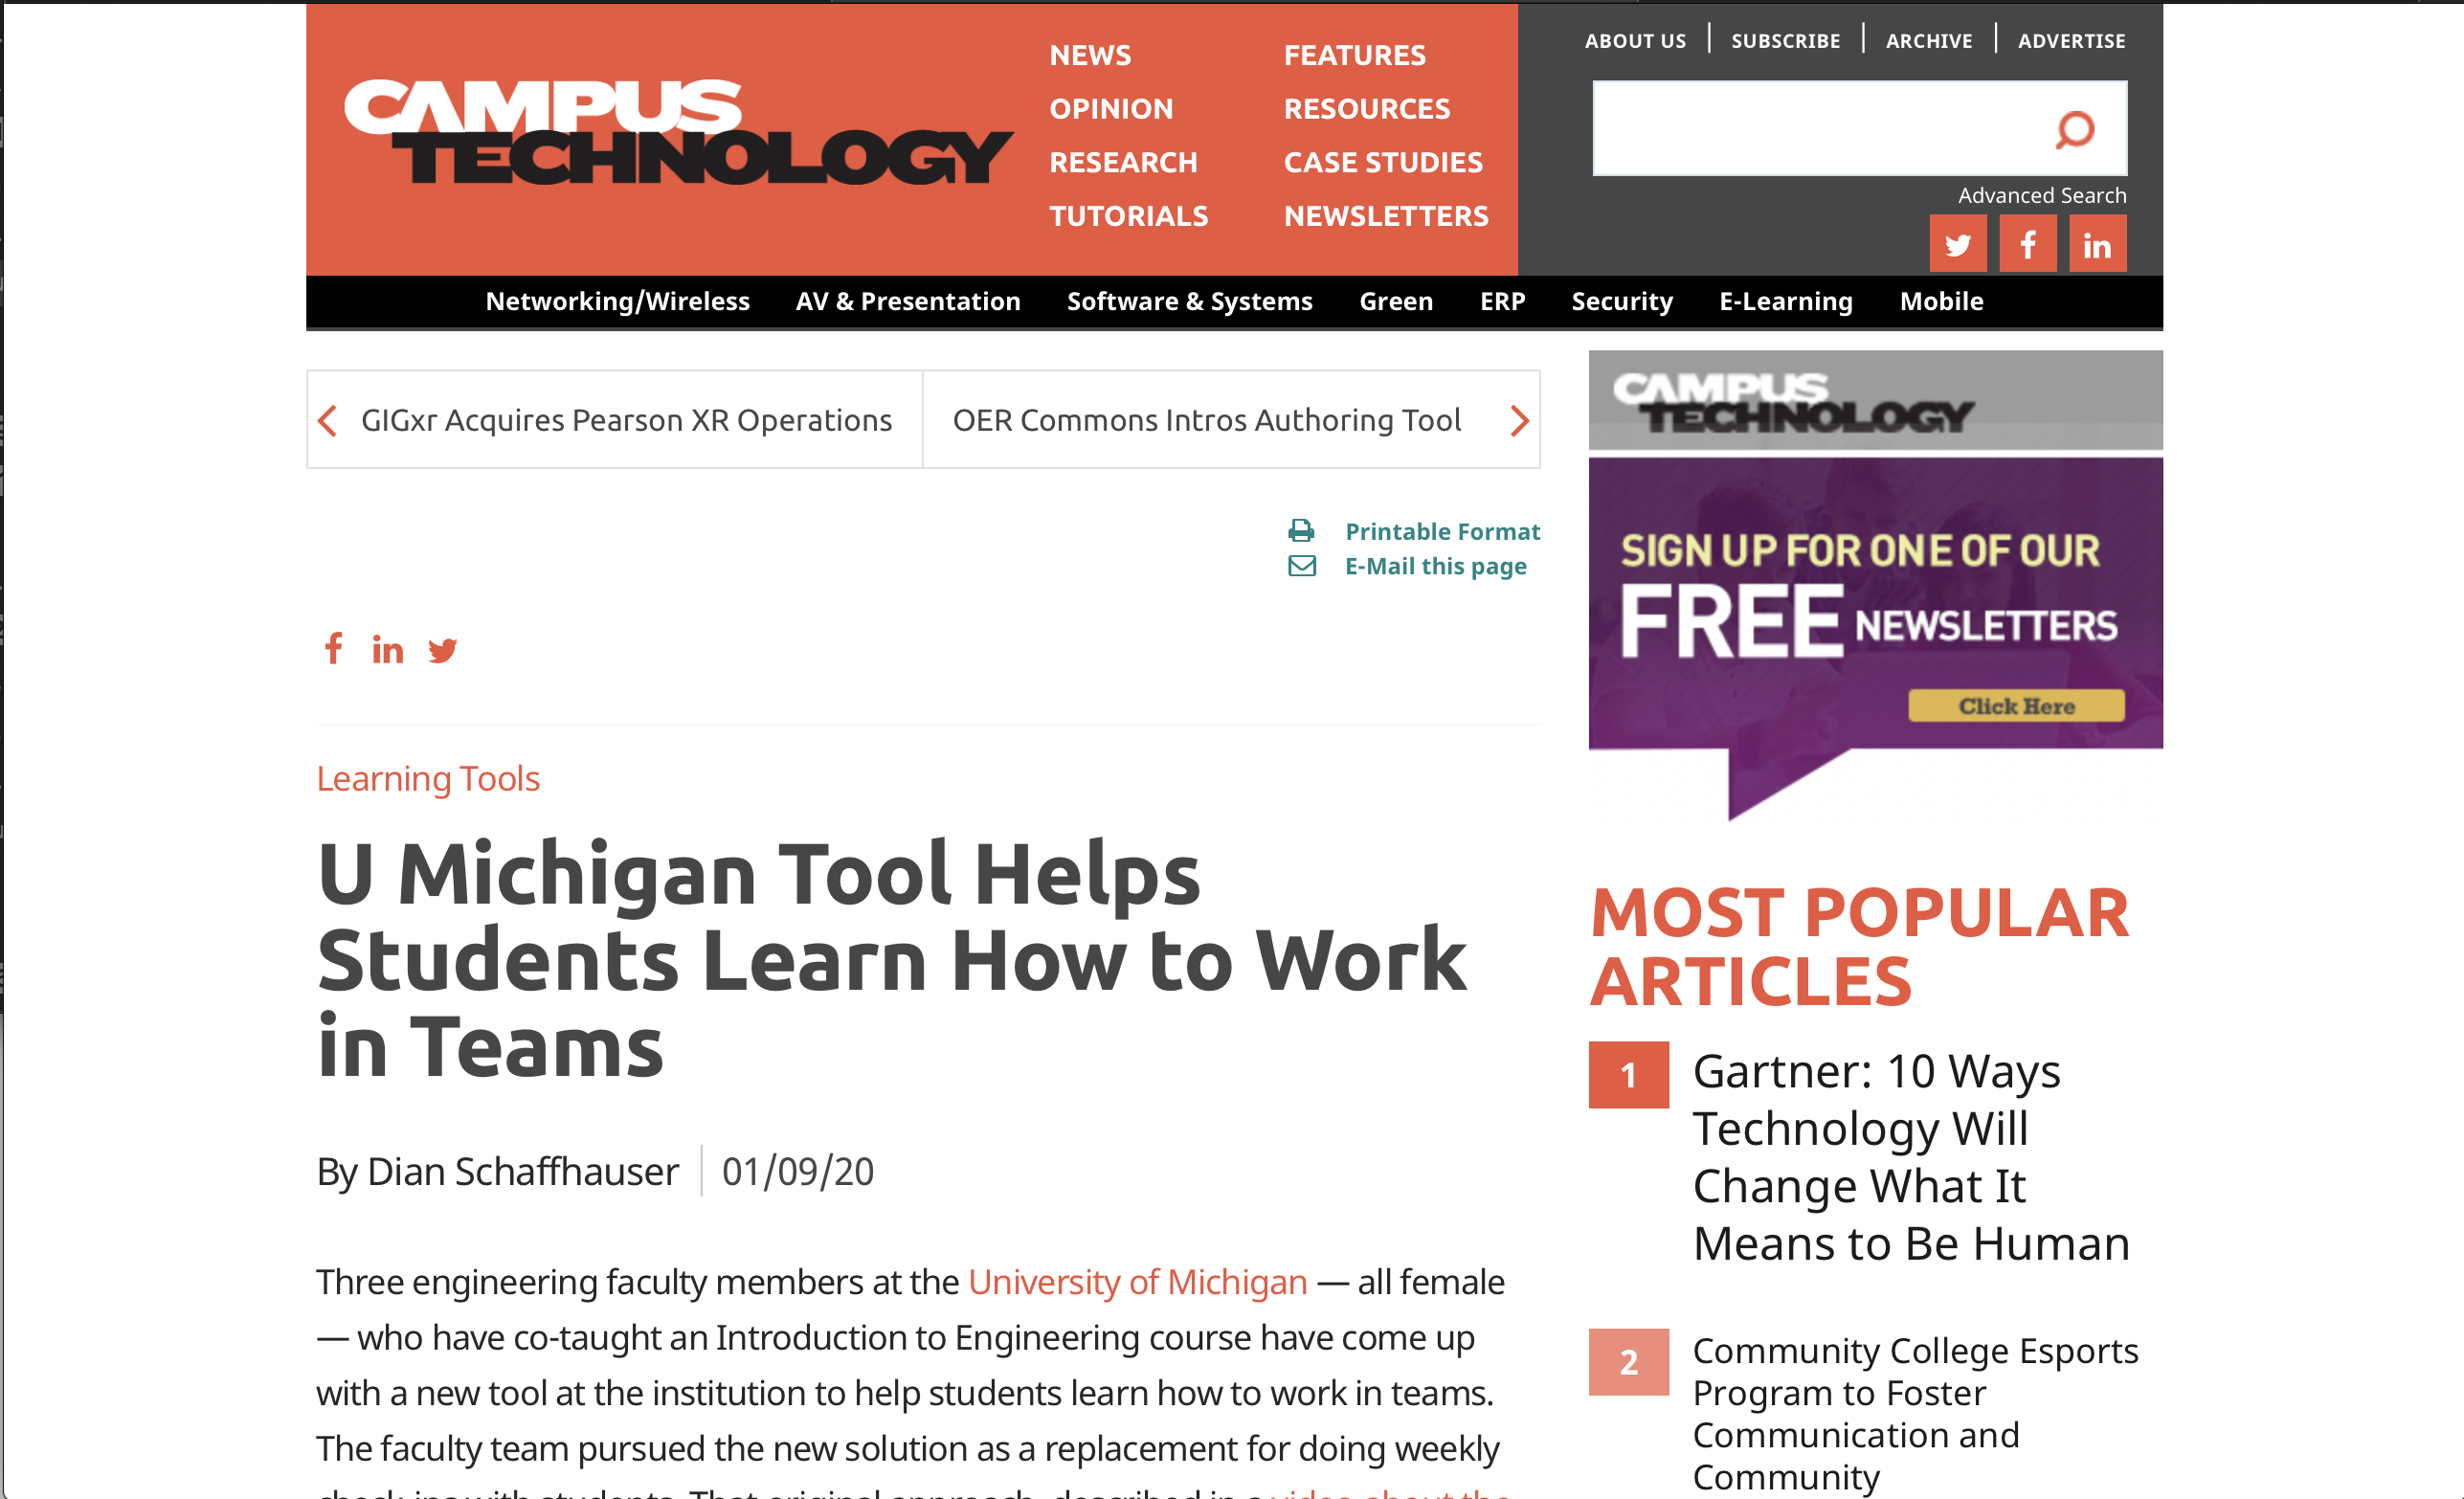 U Michigan Tool Helps Students Learn How to Work in Teams